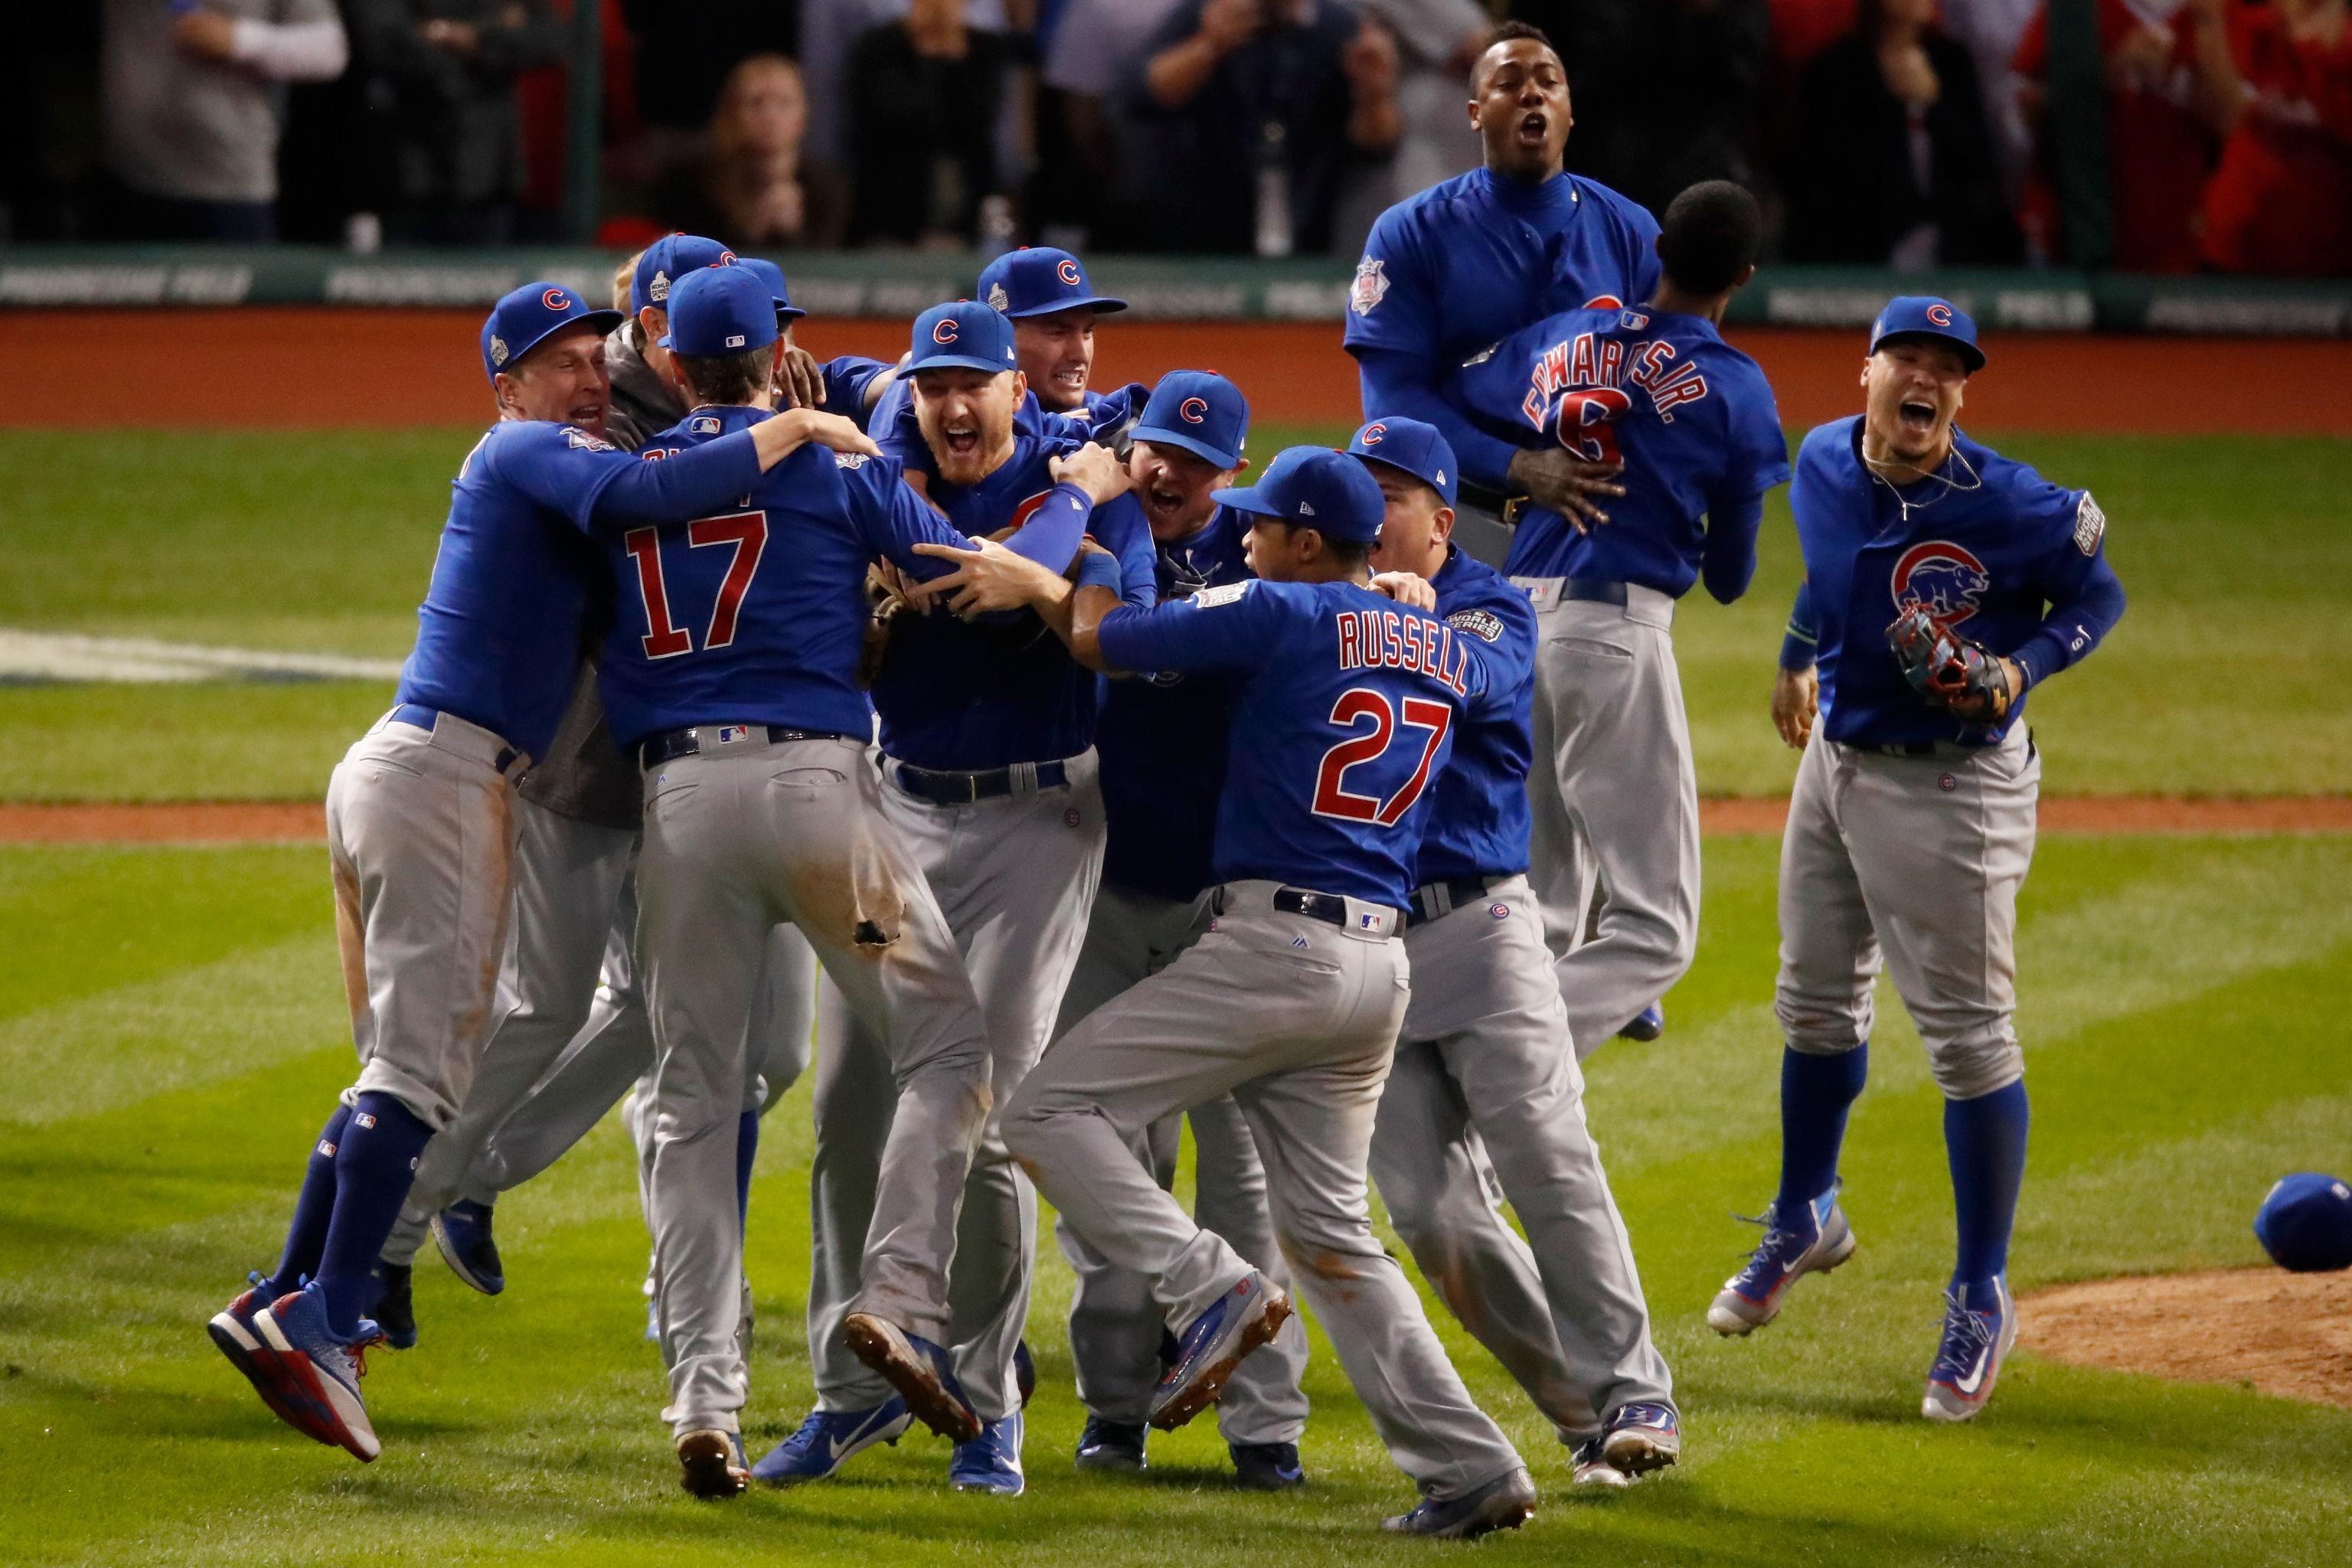 Cubs fan catches Baez home run in Game 7 of World Series